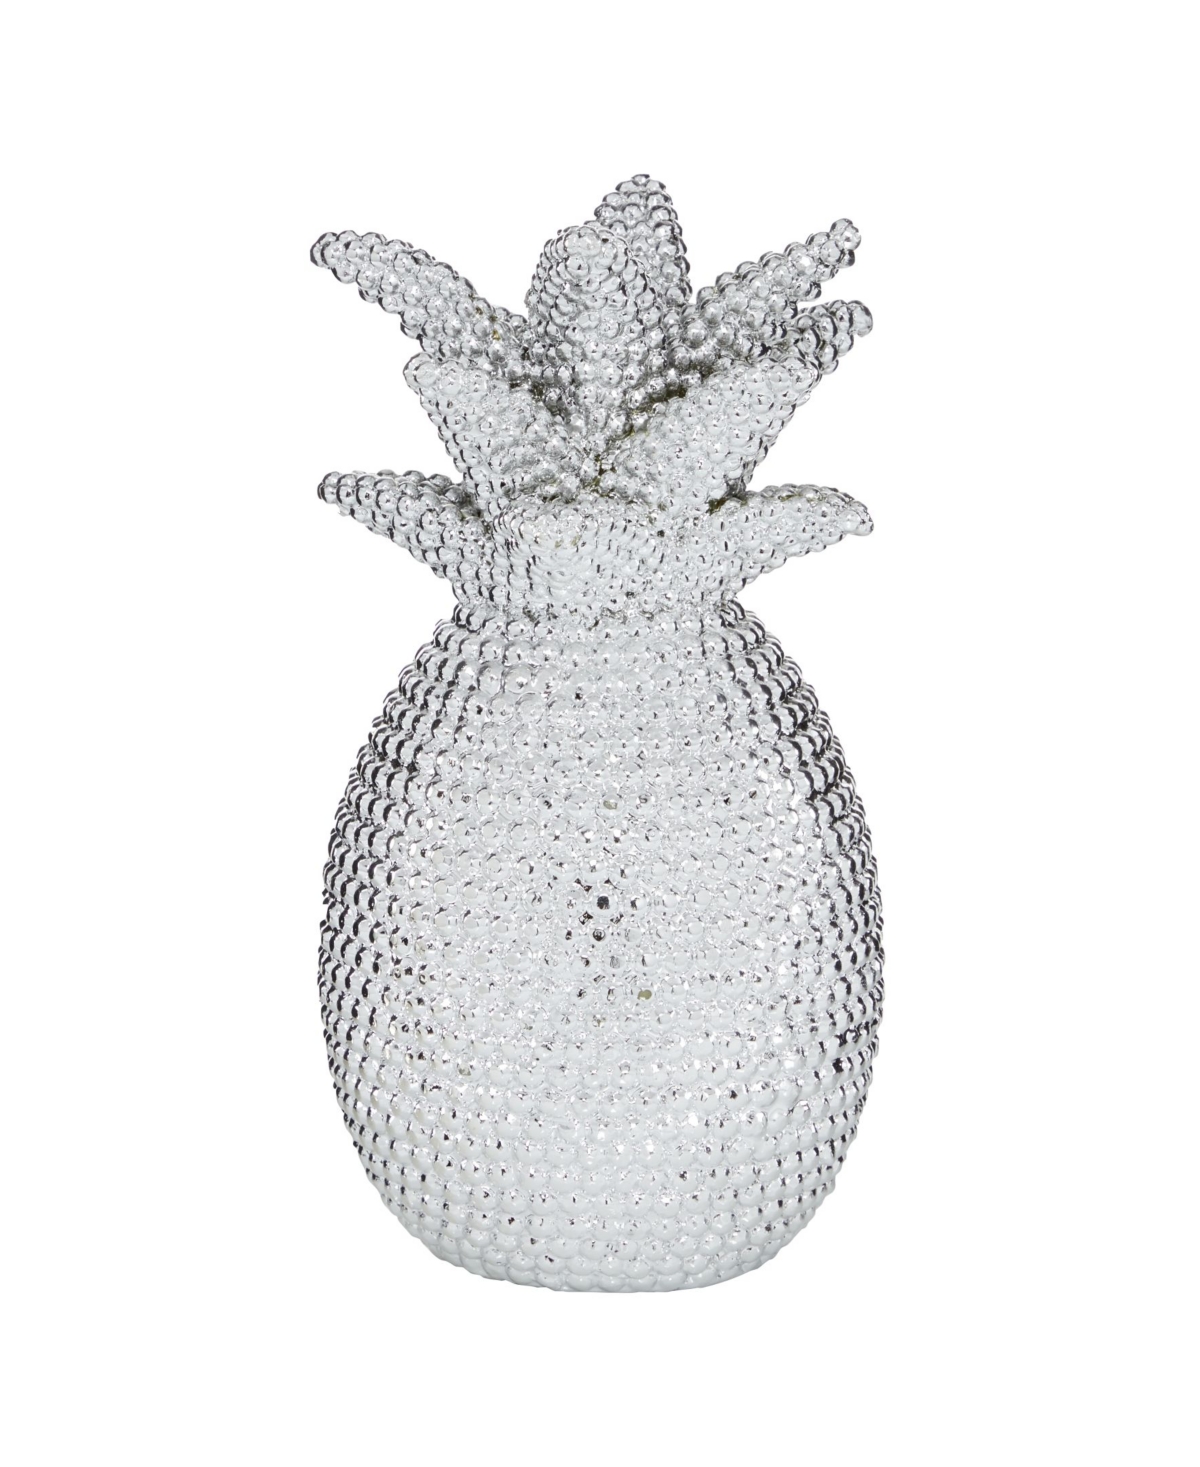 Rosemary Lane Glam Pineapple Sculpture, 12" X 6" In Silver-tone